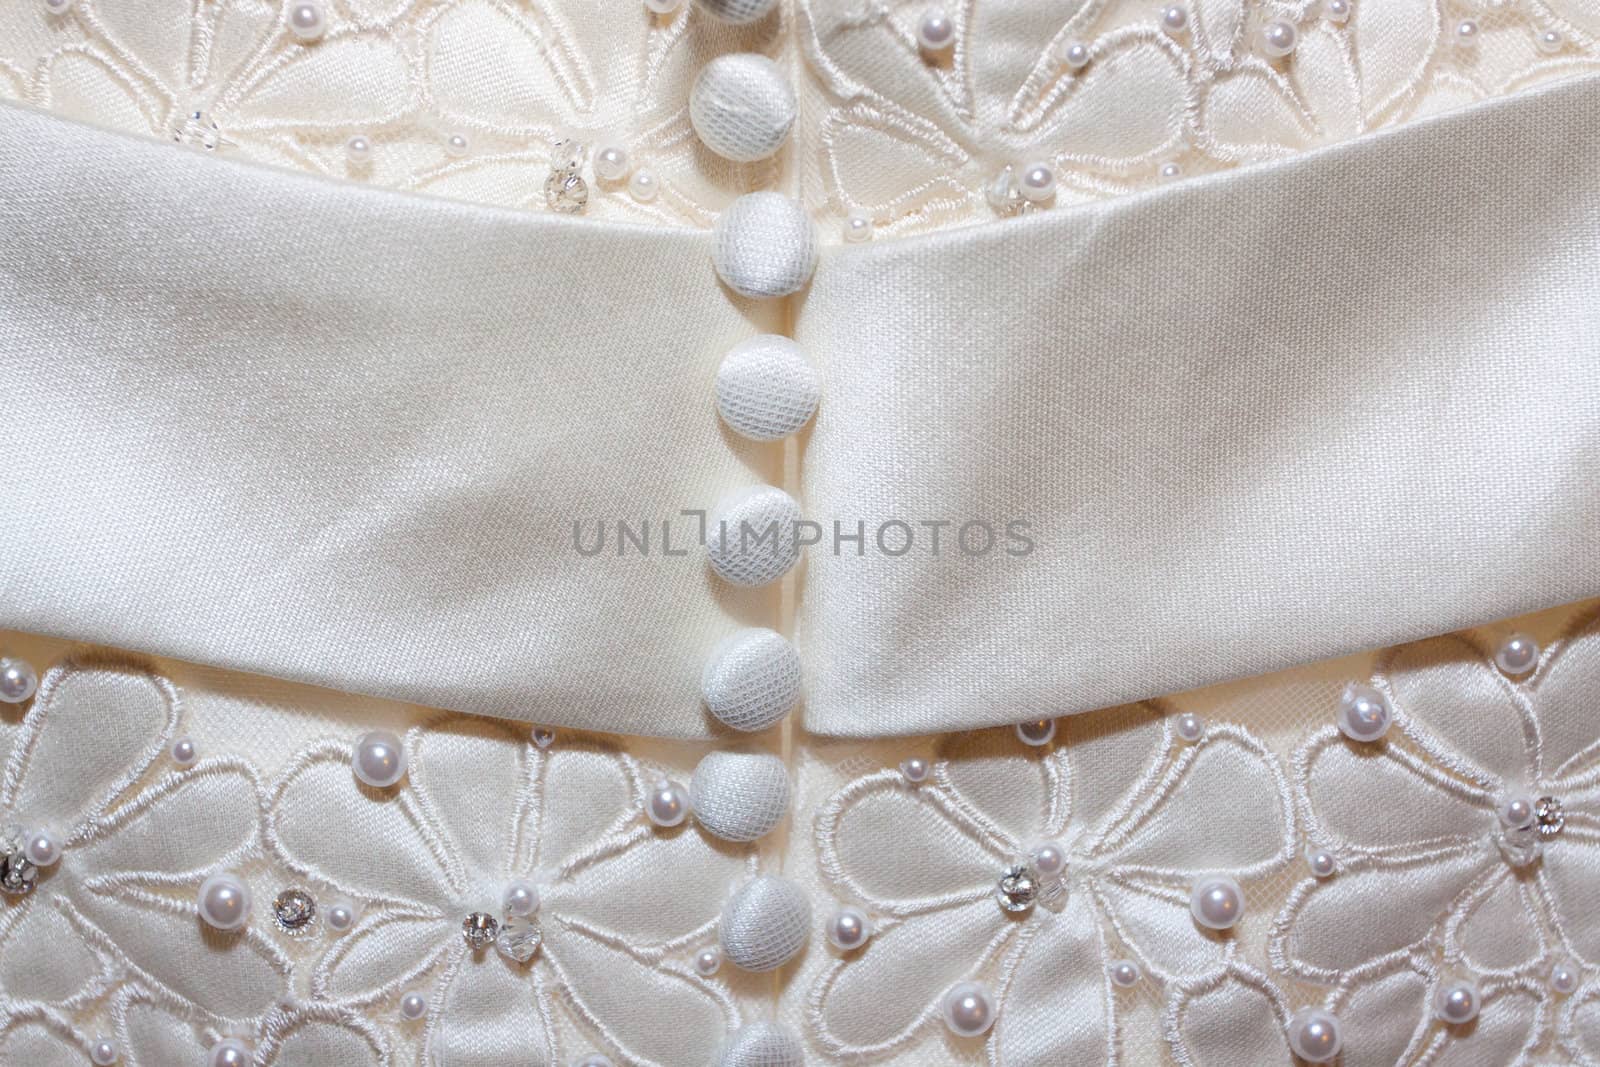 A detail image of a wedding dress before the marriage ceremony.